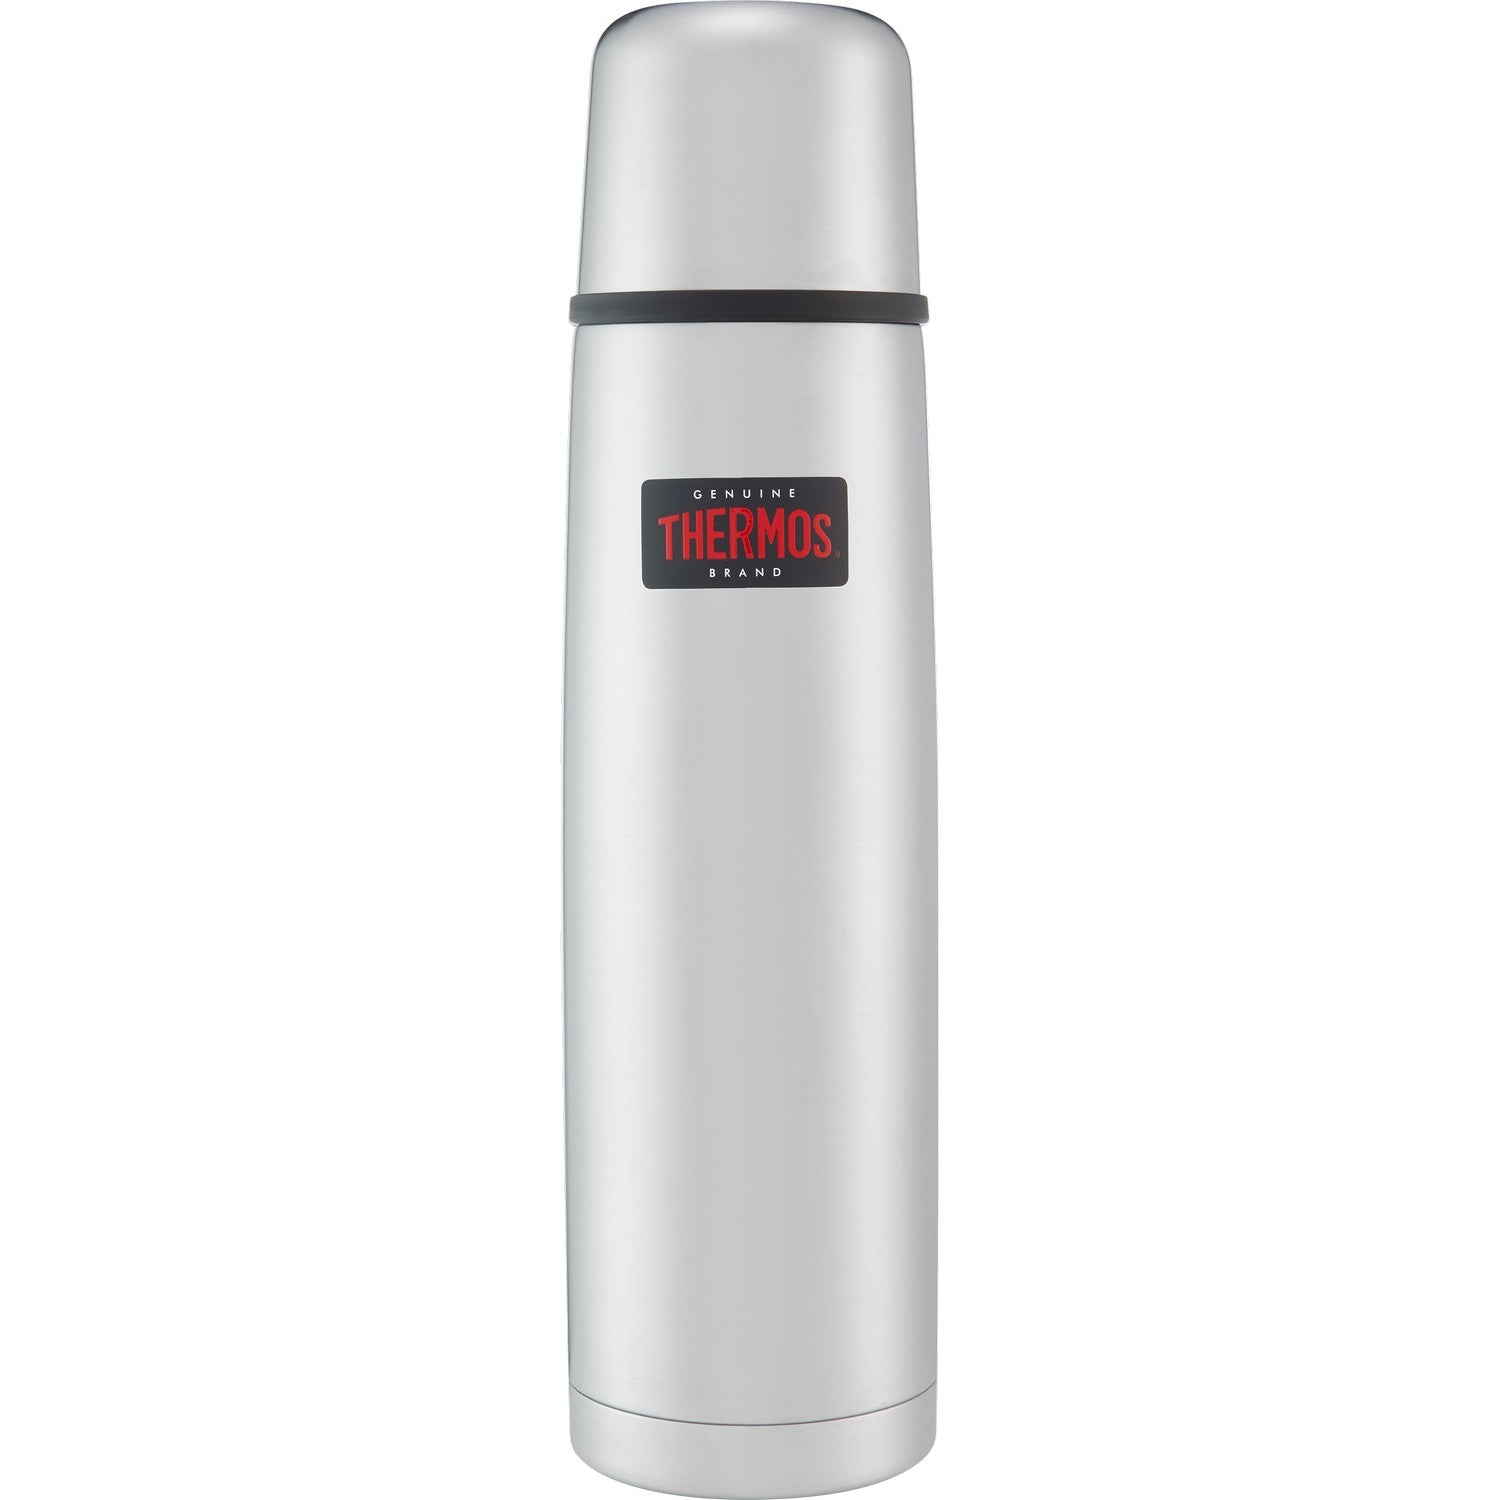 Thermos 1L Stainless Steel Vacuum Flask